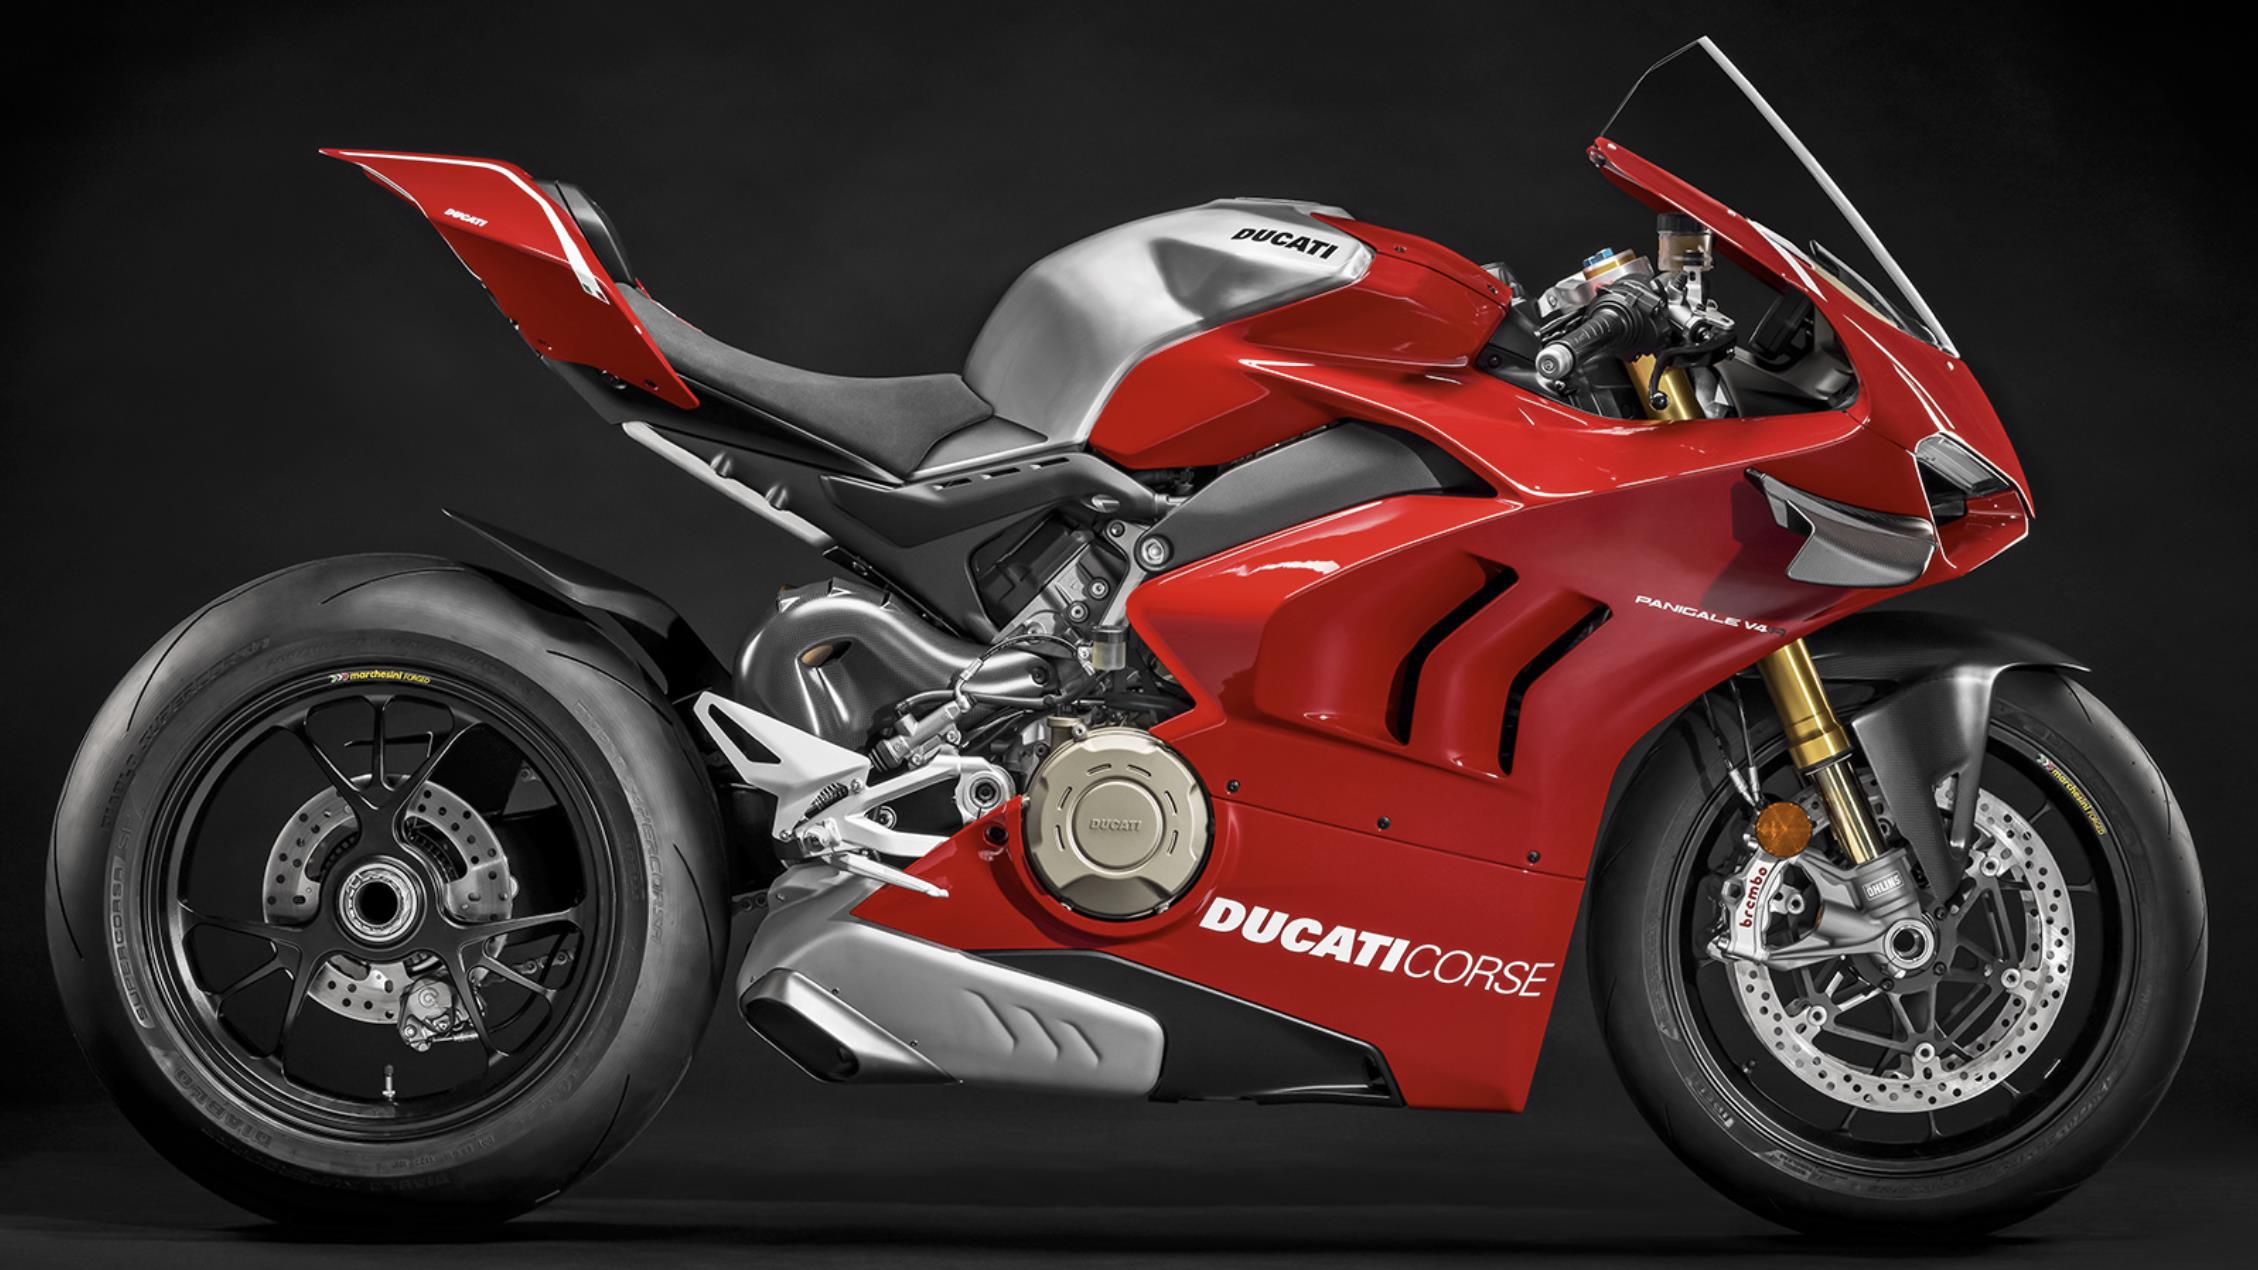 2022 Ducati Panigale V4 R Specifications and Expected Price in India